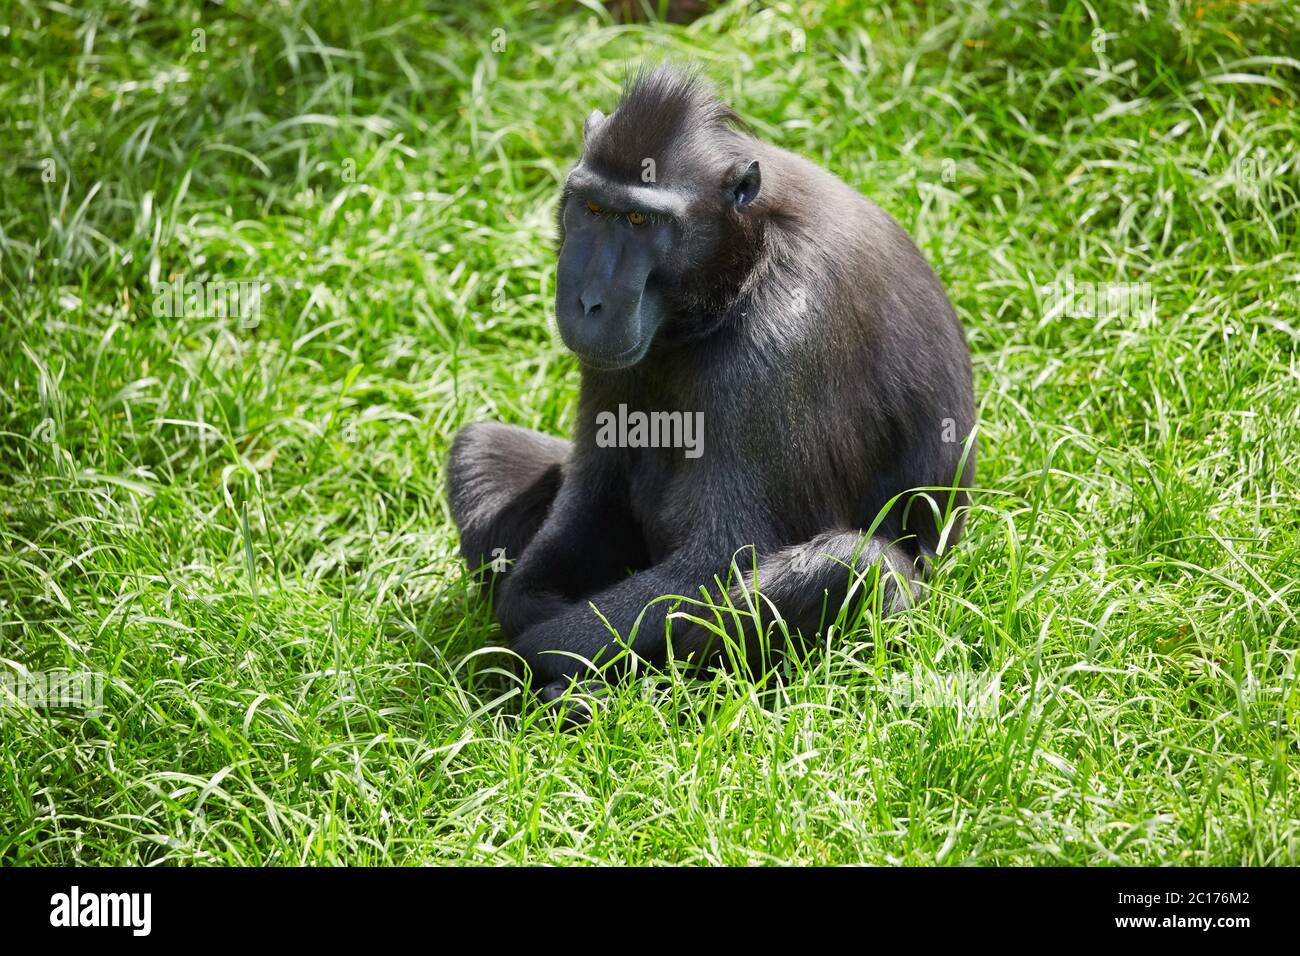 Sulawesi Crested Macaque Stockfoto